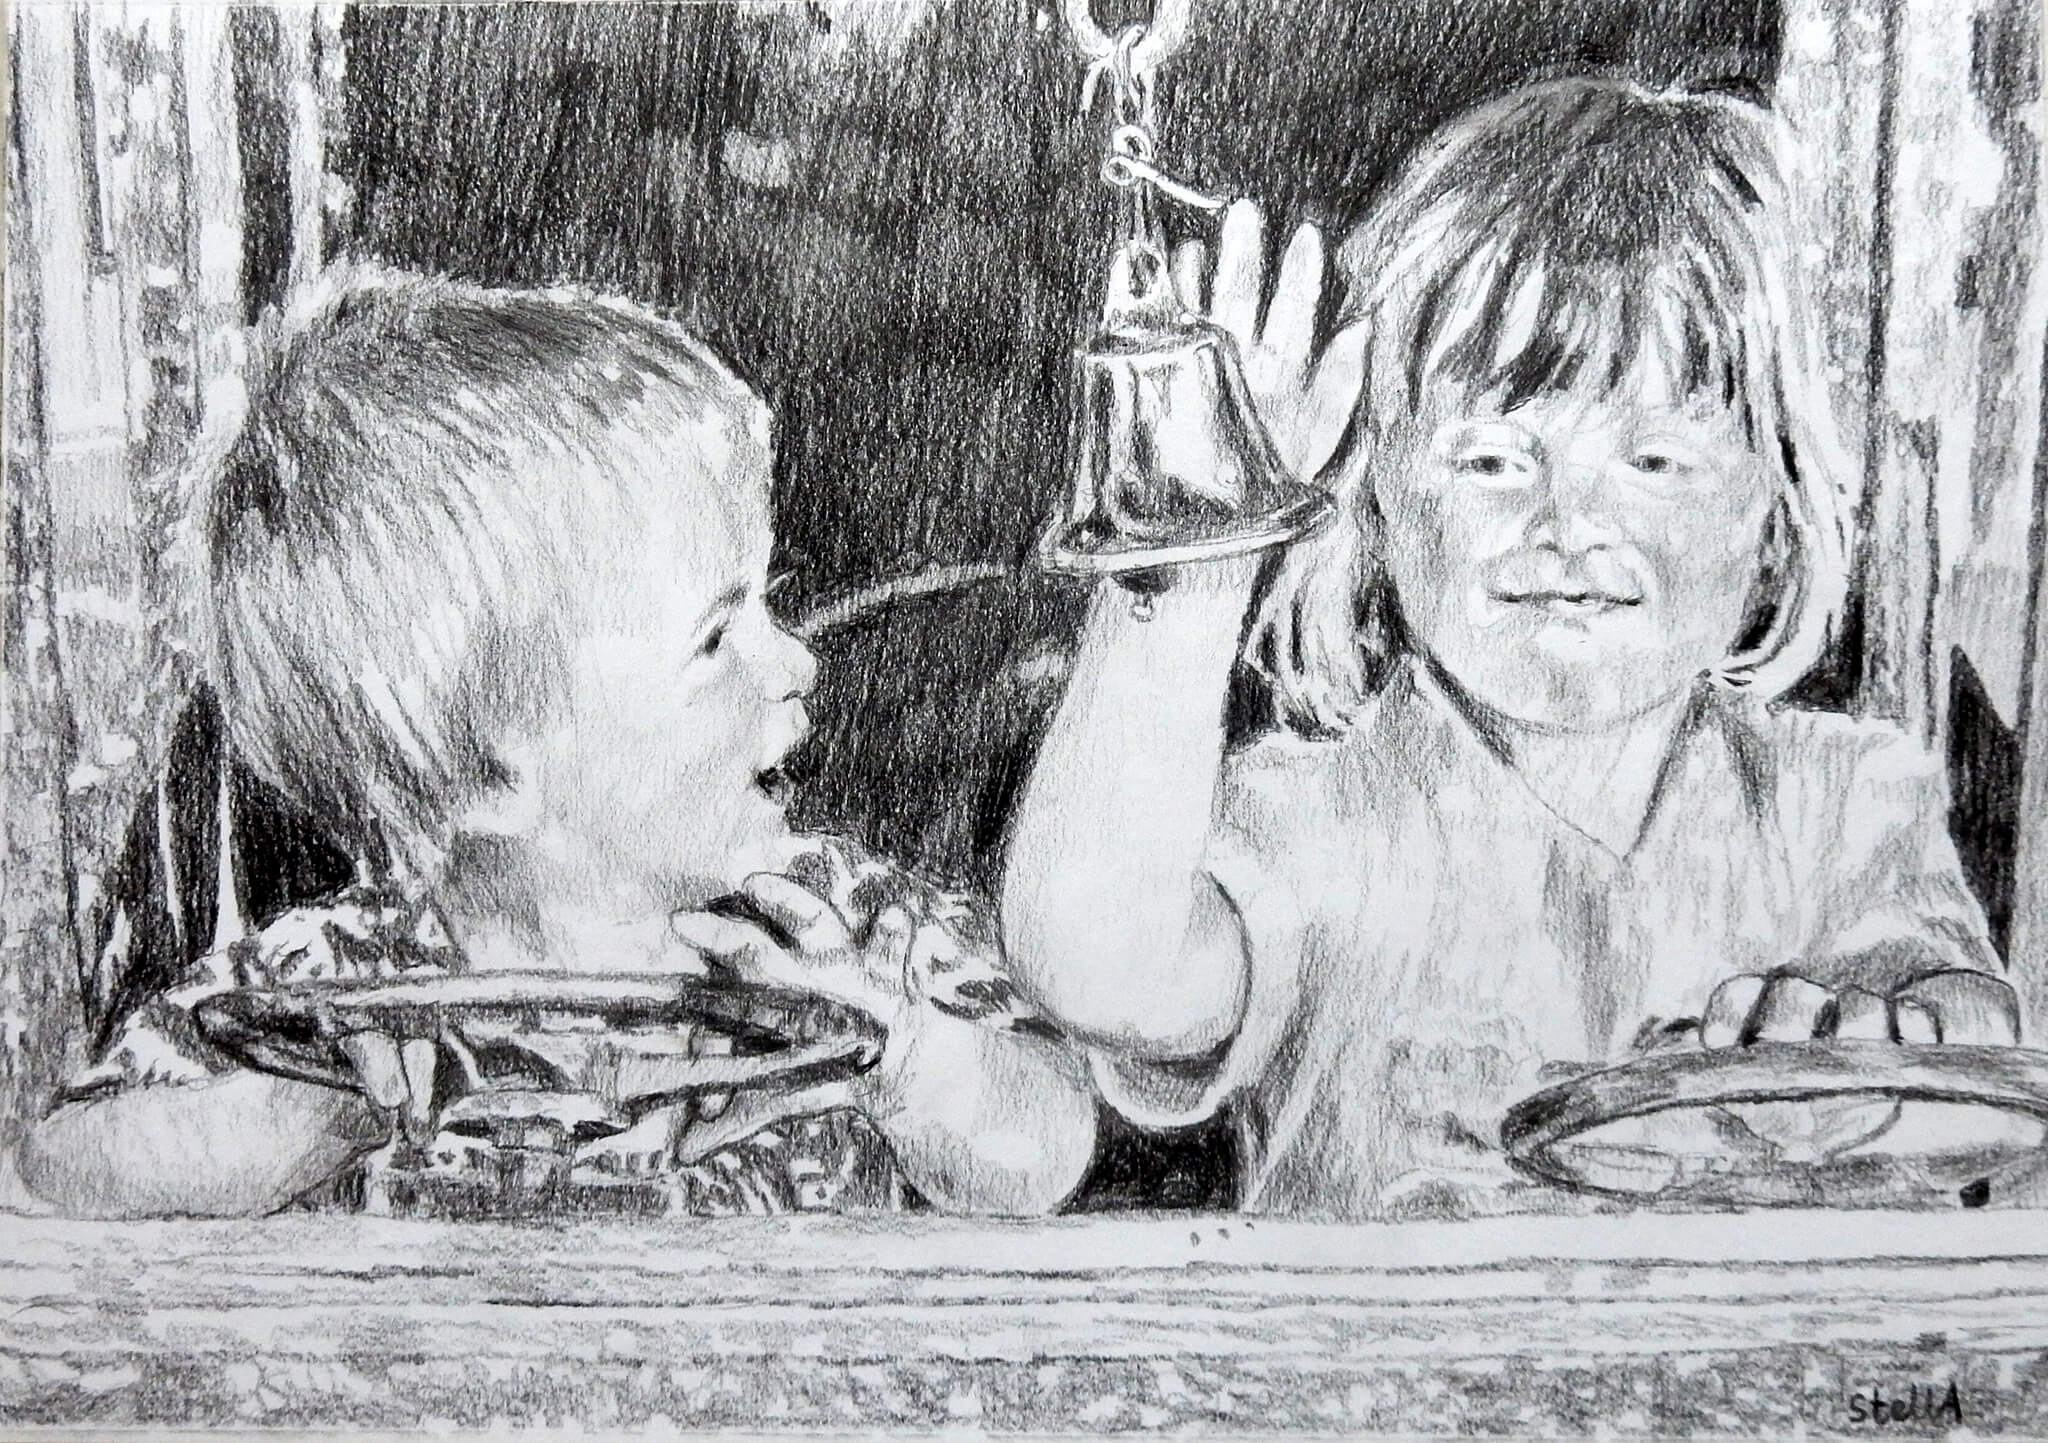 Tim Beeson and sister commissioned childhood drawing on paper from photo by Stella Tooth